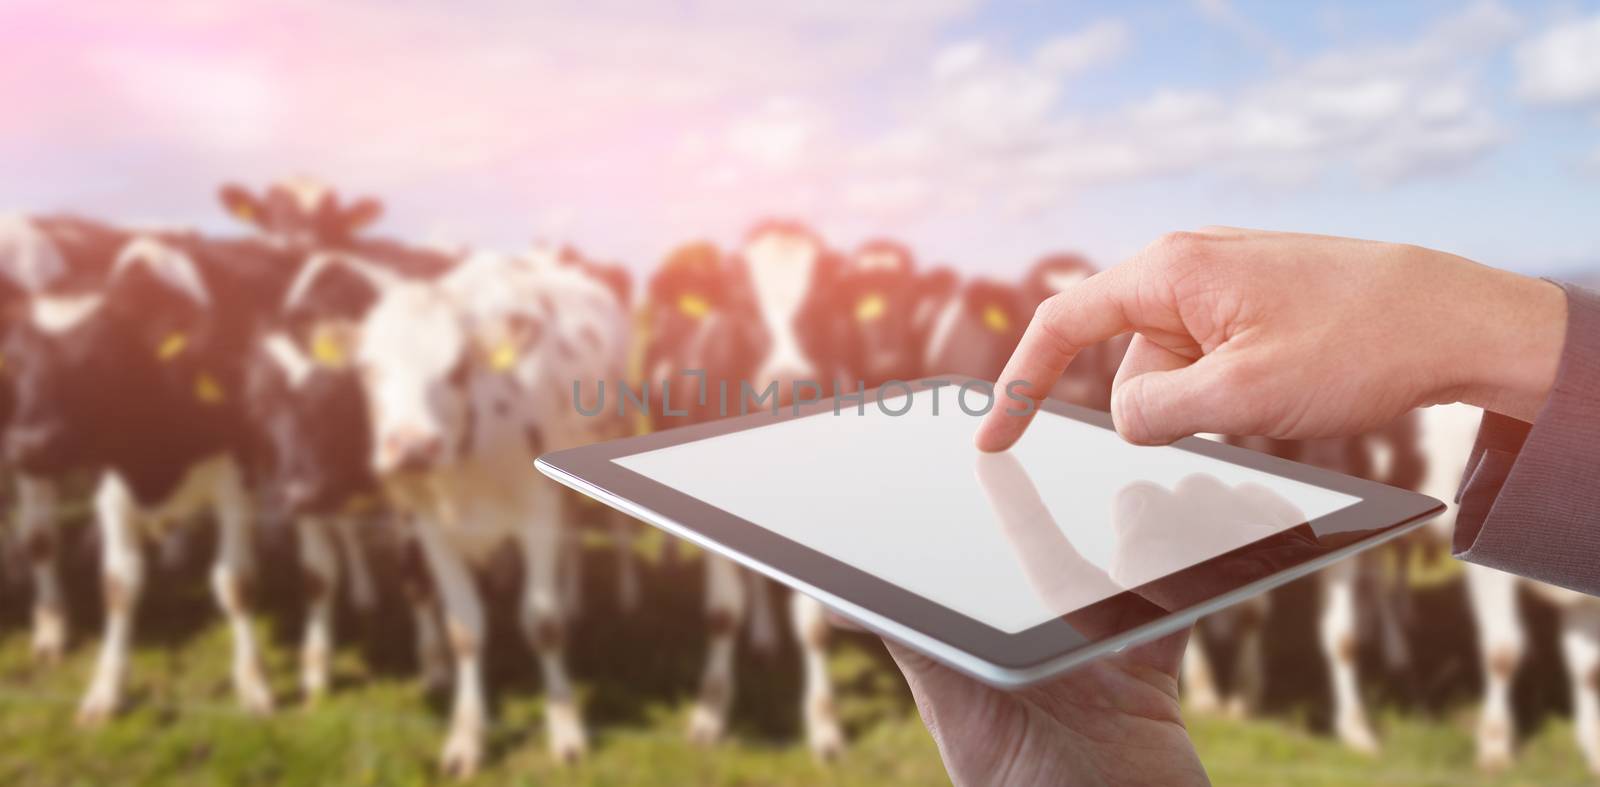 Cropped hands of businessman using digital tablet against cows at farm